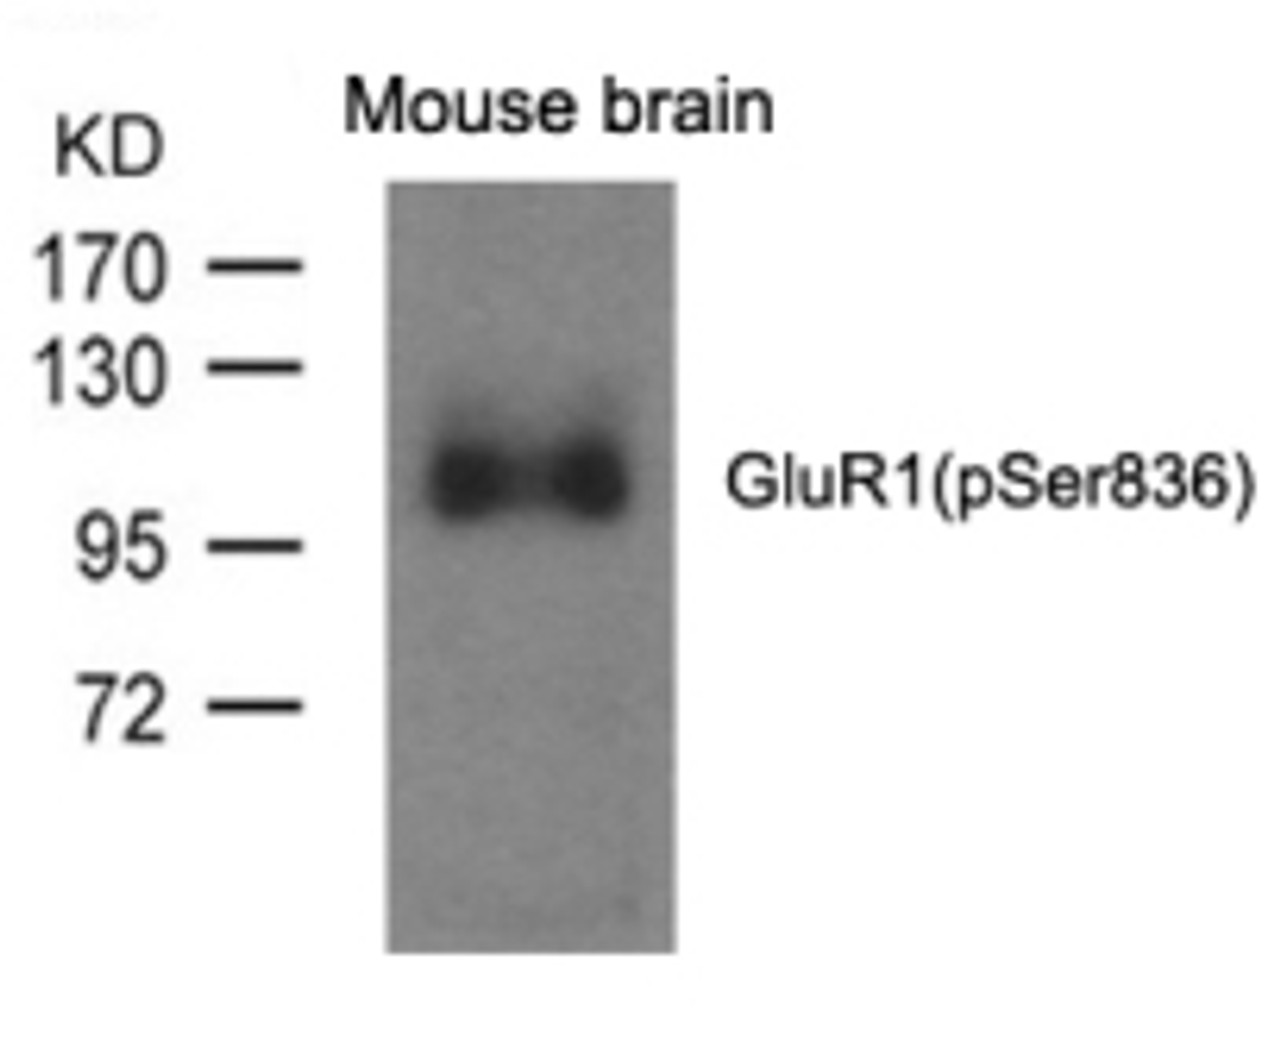 Western blot analysis of lysed extracts from mouse brain and using GluR1 (phospho-Ser836) .